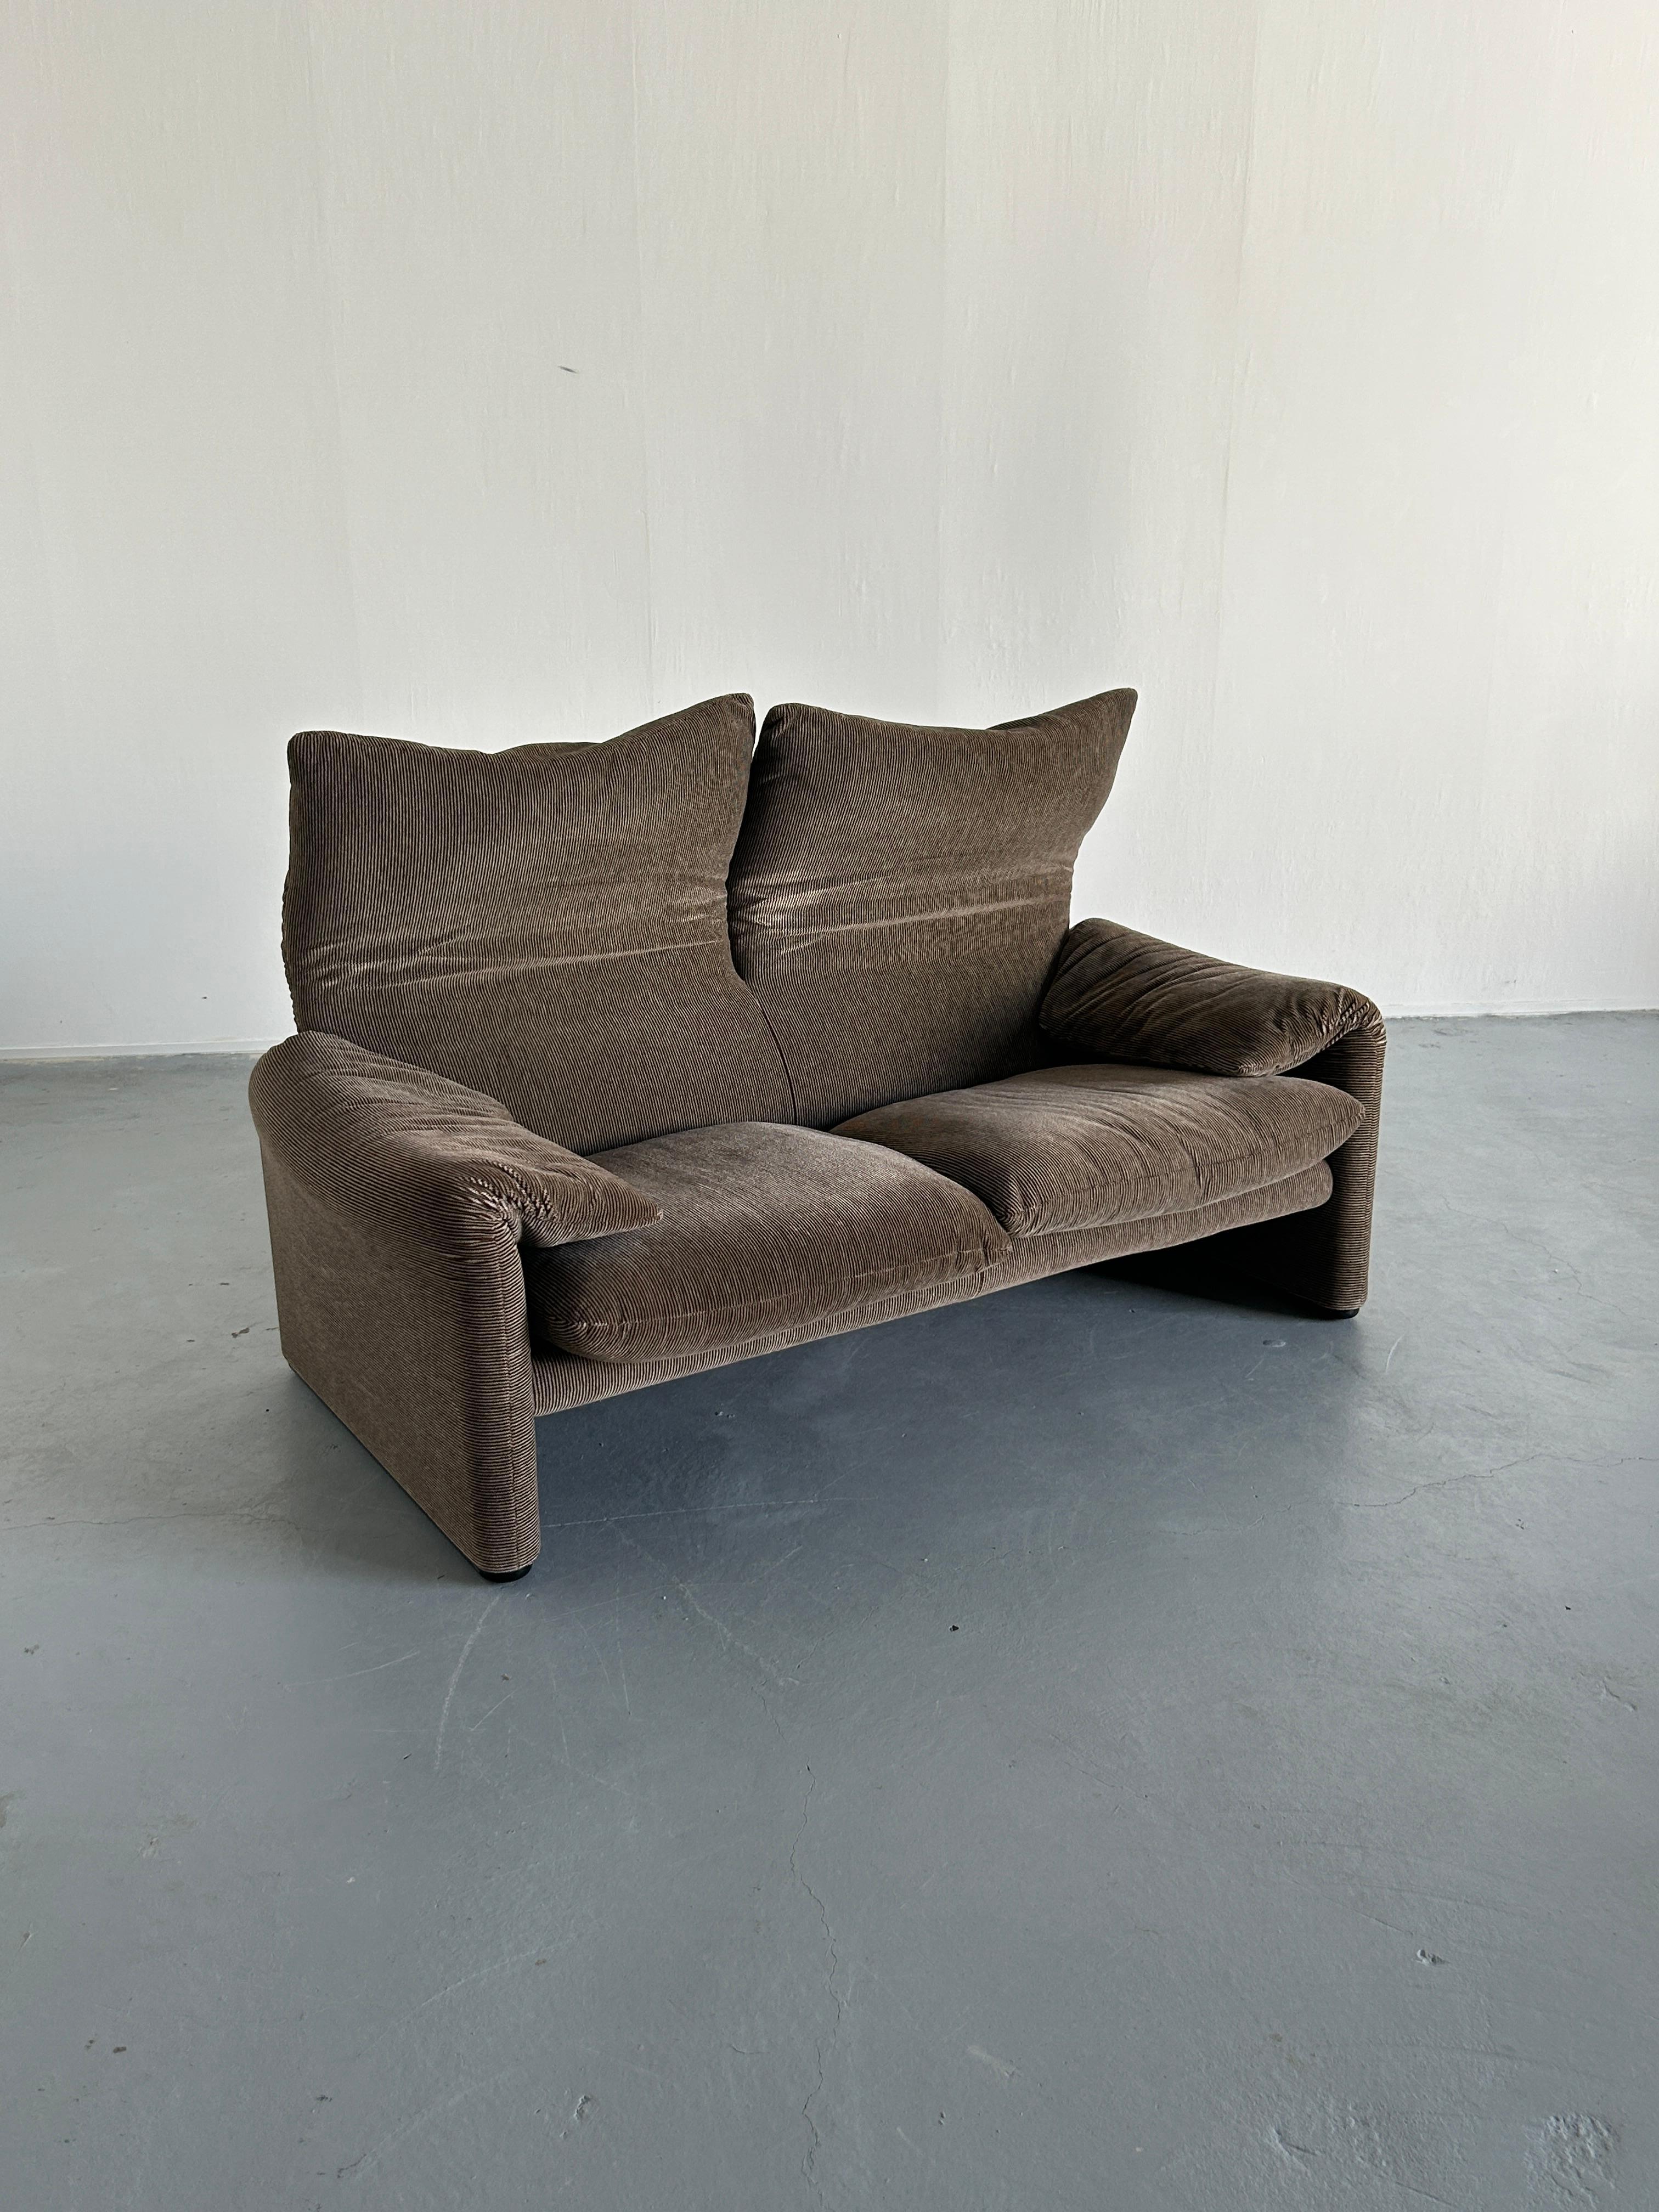 Mid-Century Modern Vintage 'Maralunga' Iconic Two-Seater Sofa by Vico Magistretti for Cassina, 70s